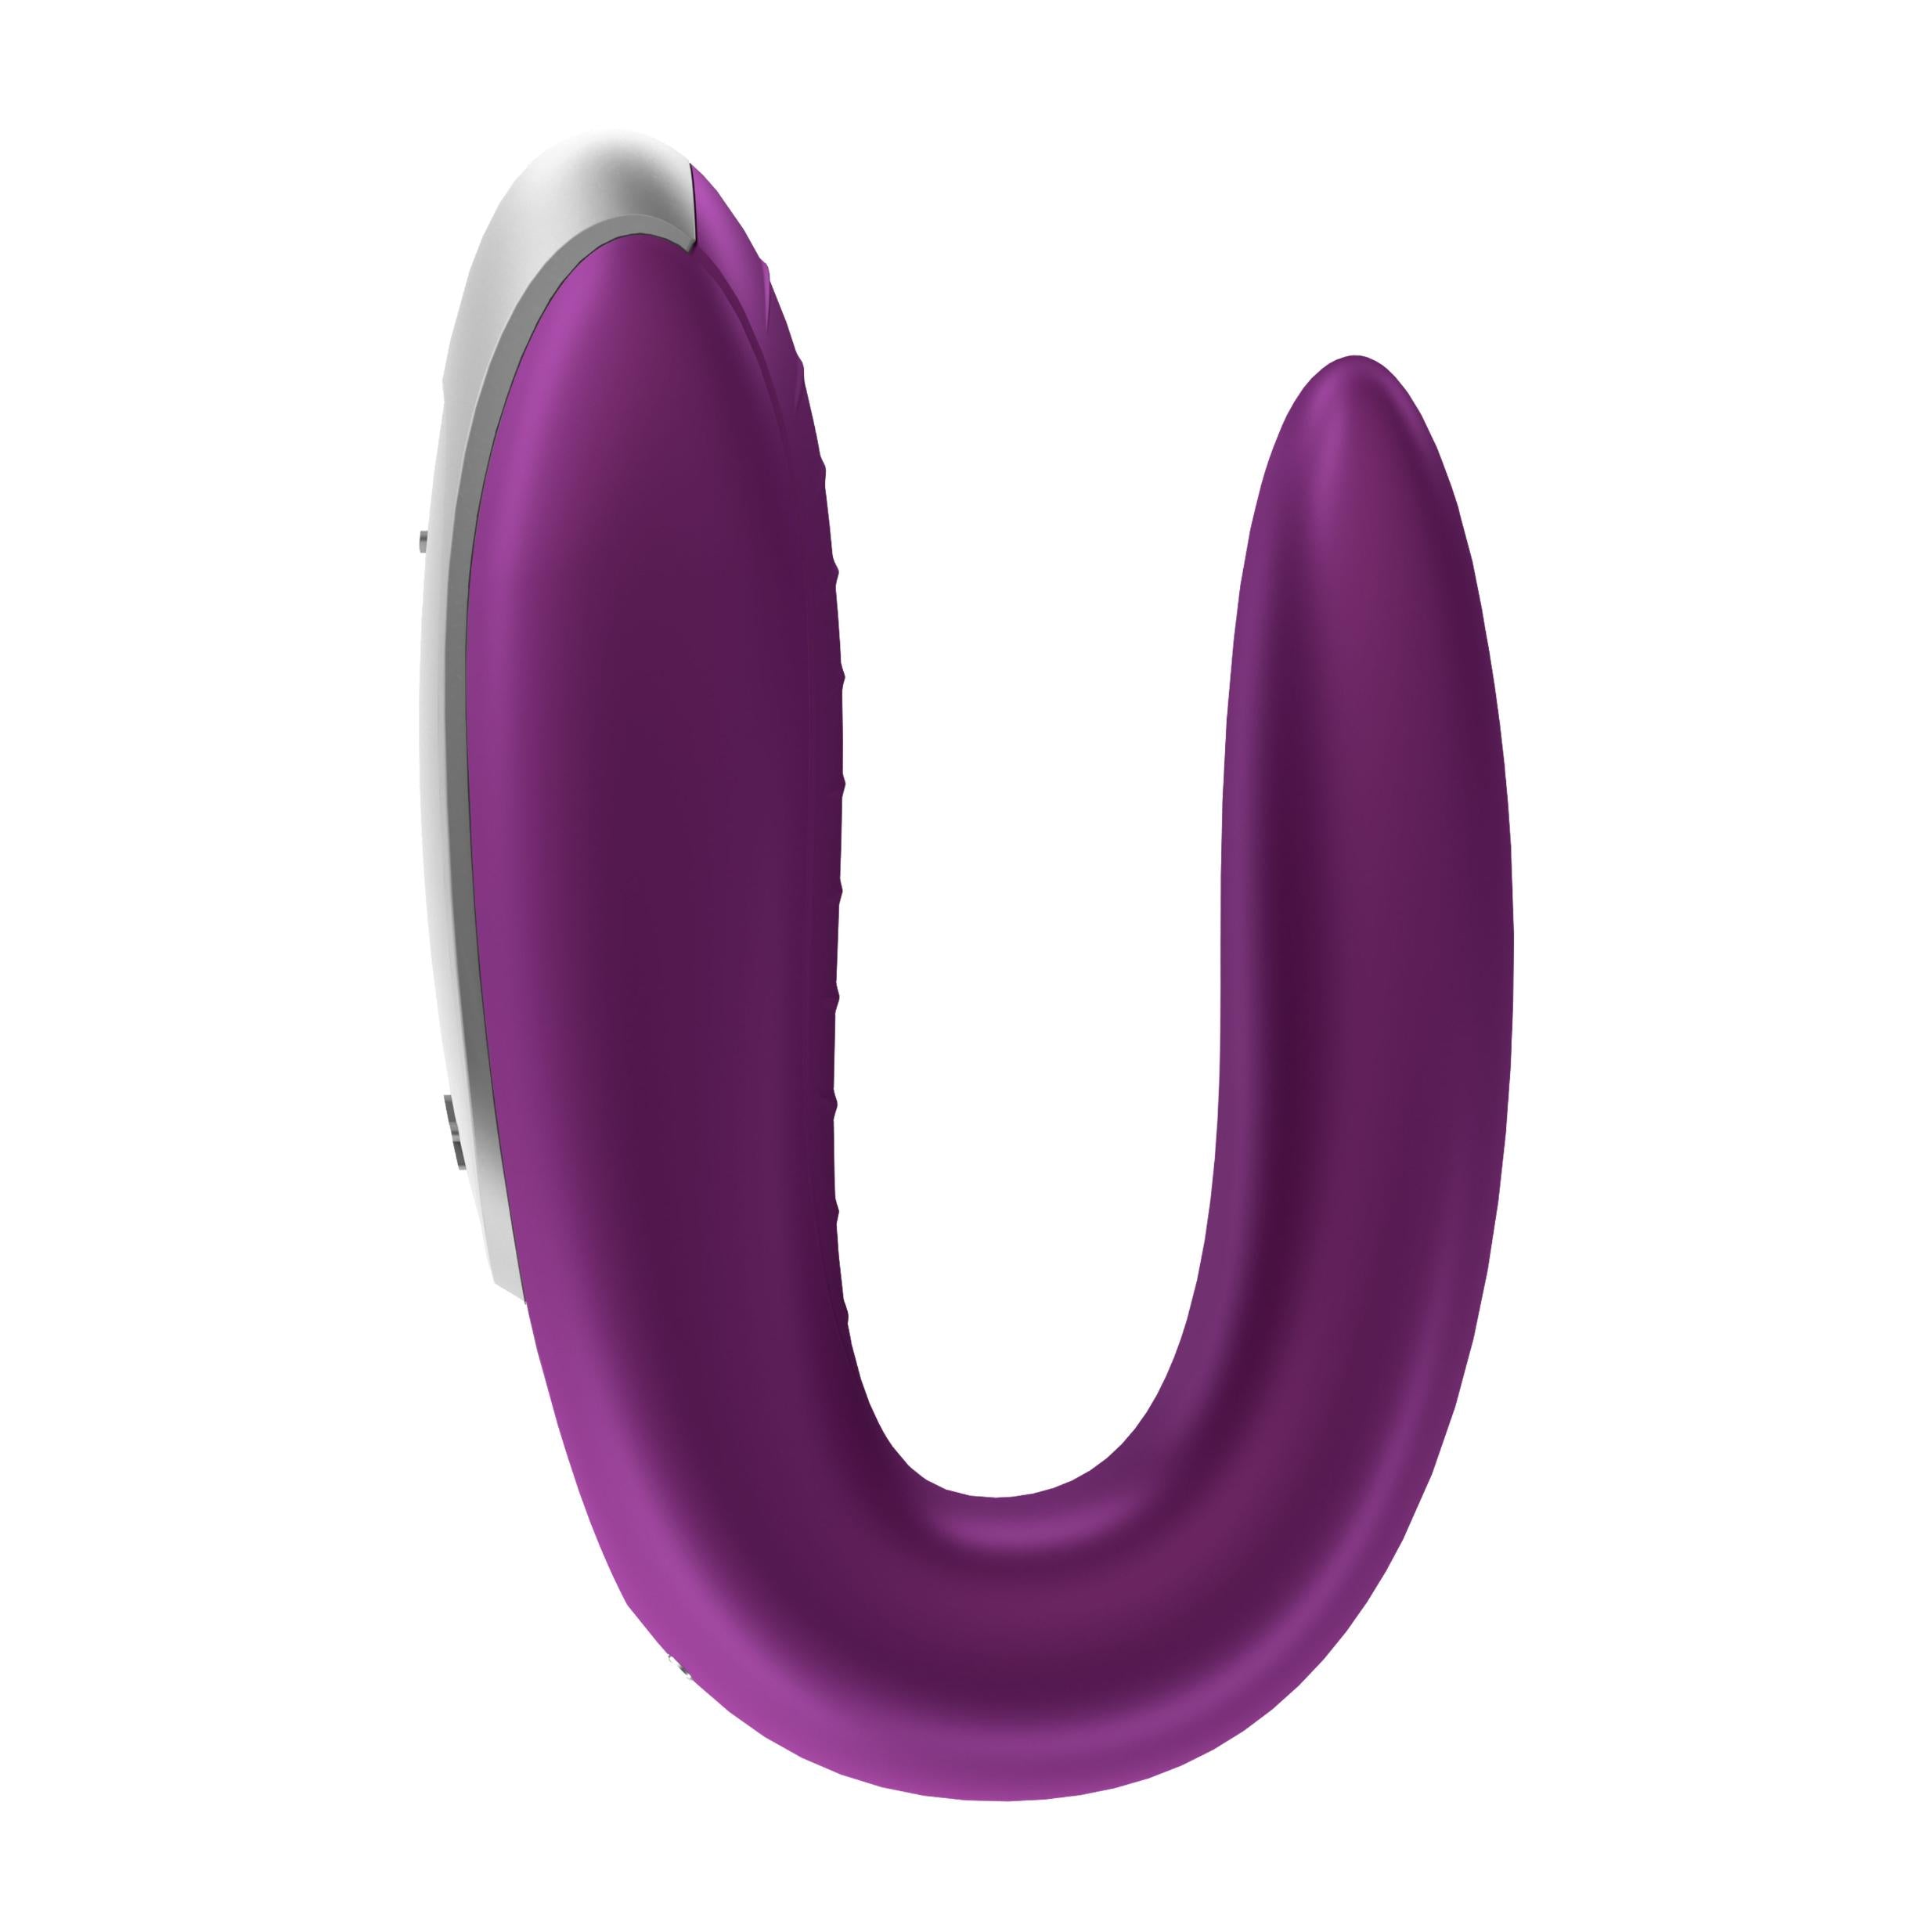 Satisfyer Double Fun Vaginal and Clitoral Vibrator